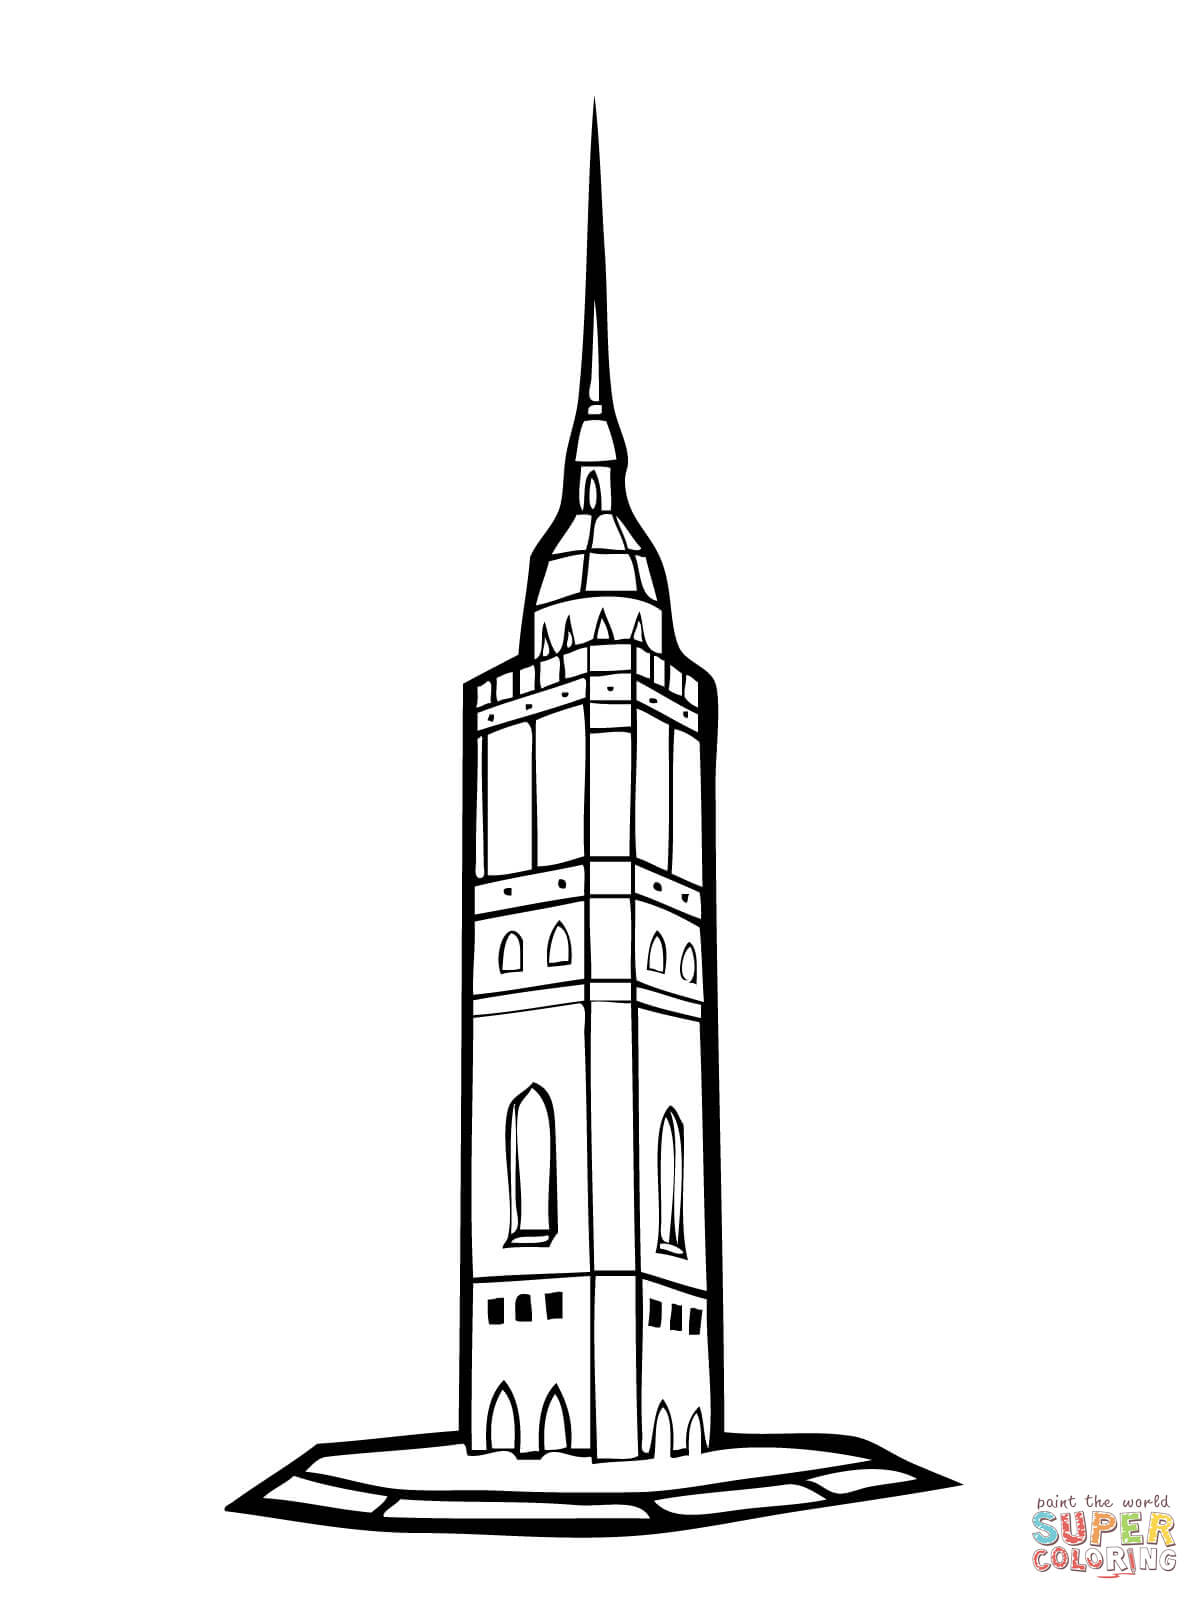 Tower in Stockholm coloring page | Free Printable Coloring Pages